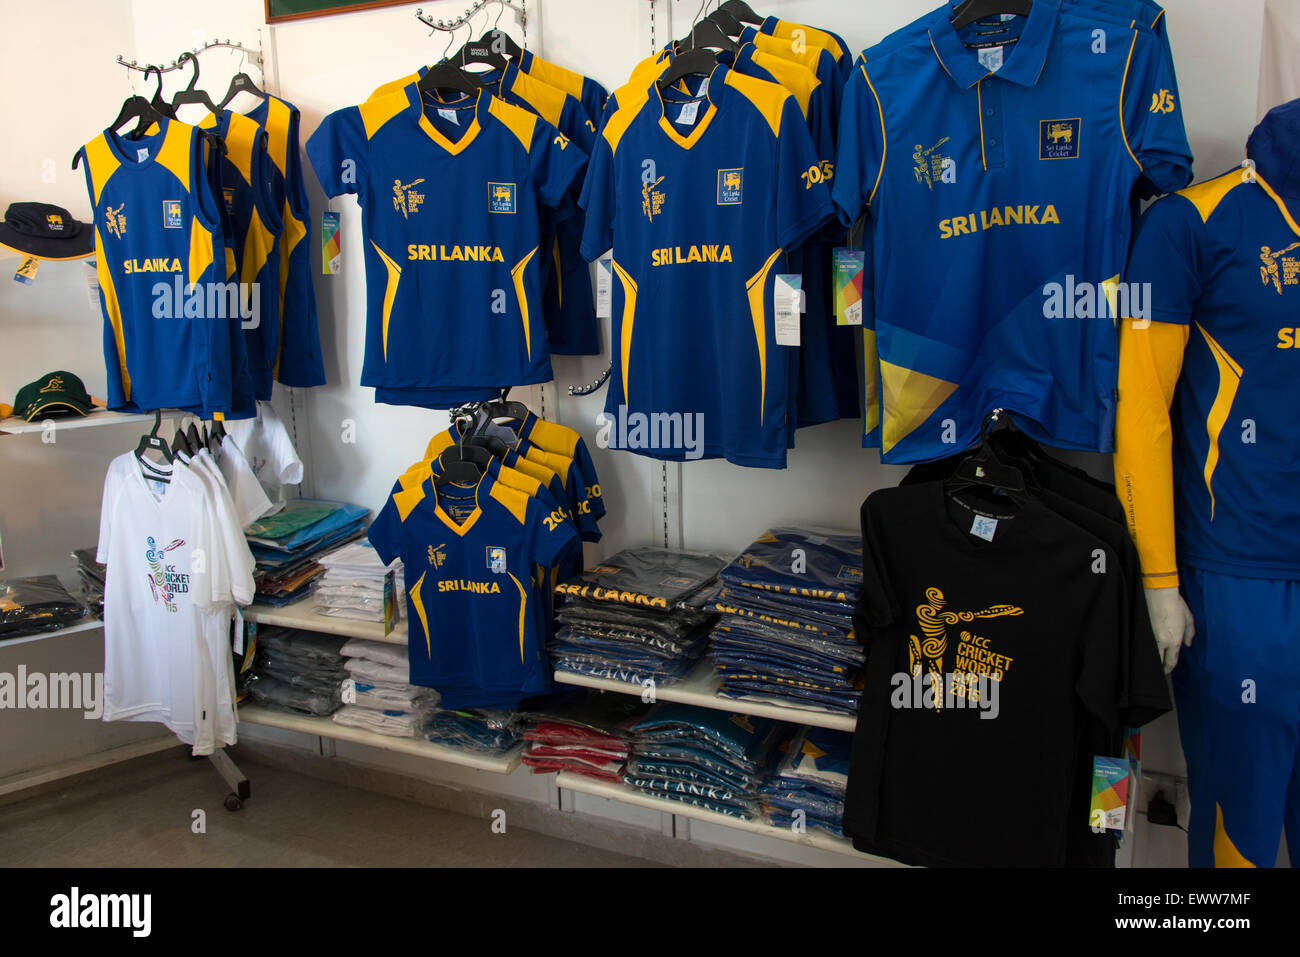 Club merchandise on sale at the Sinhalese Sports Club Ground on Maitland Place, Colombo, Sri Lanka. Stock Photo